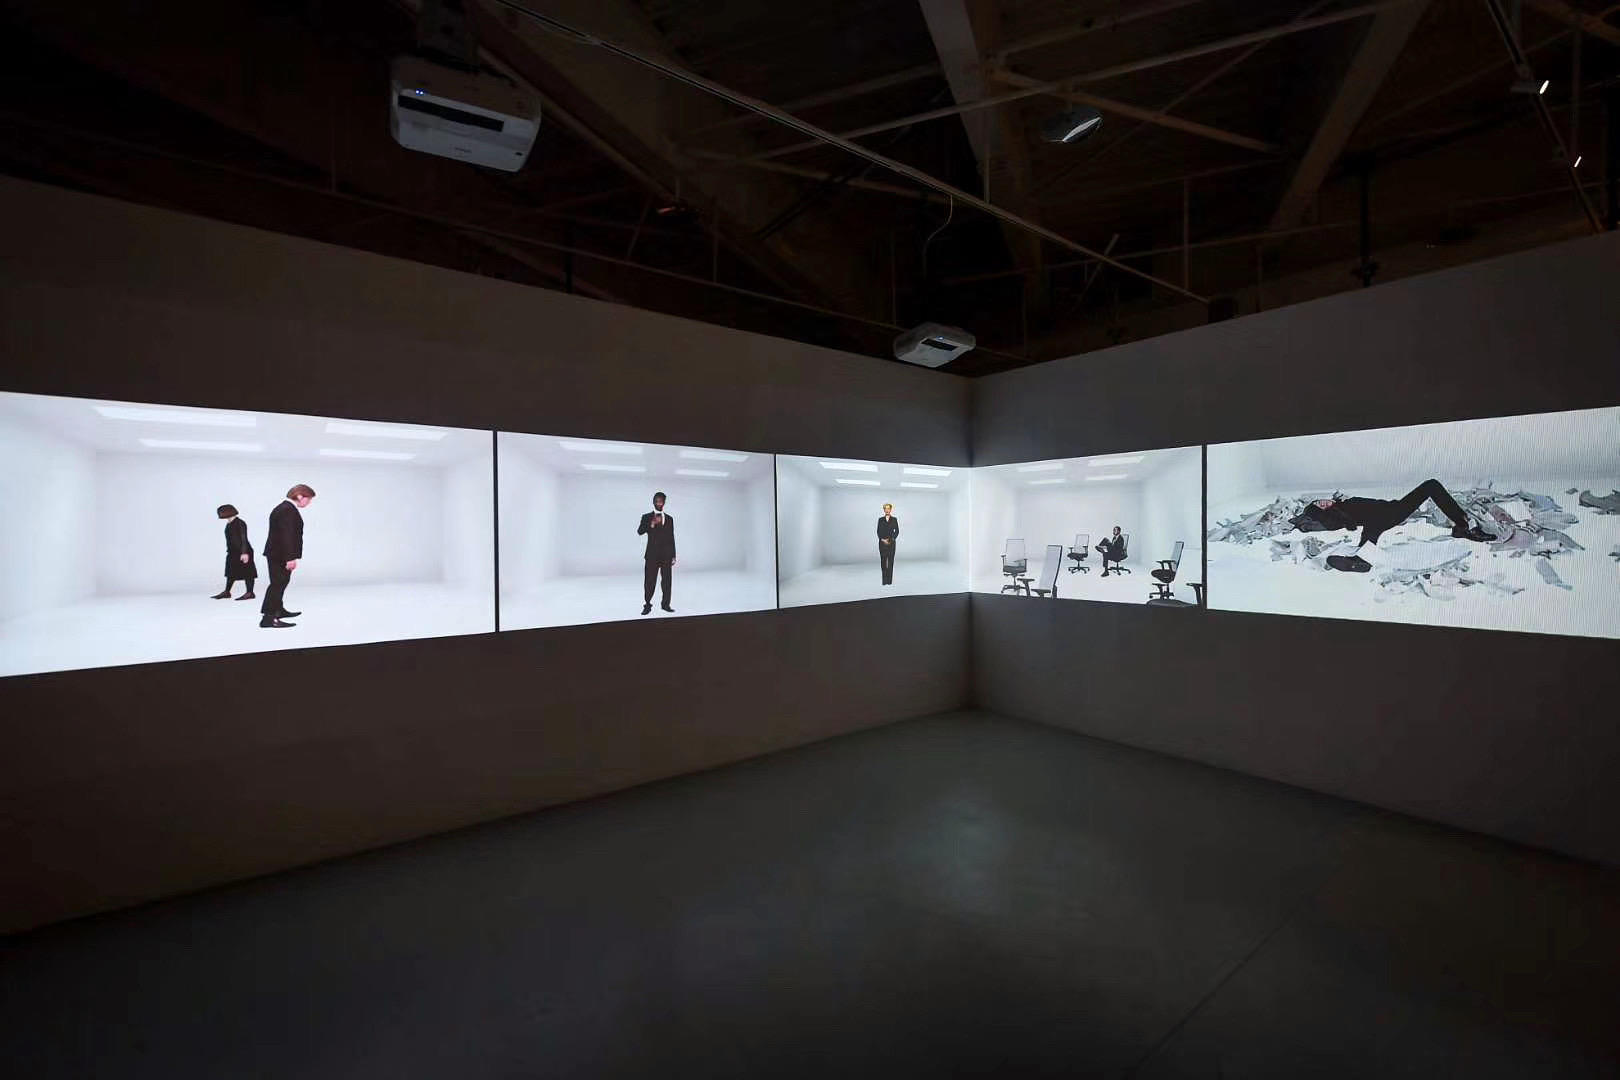 Installation view of video work by Lisha Nie